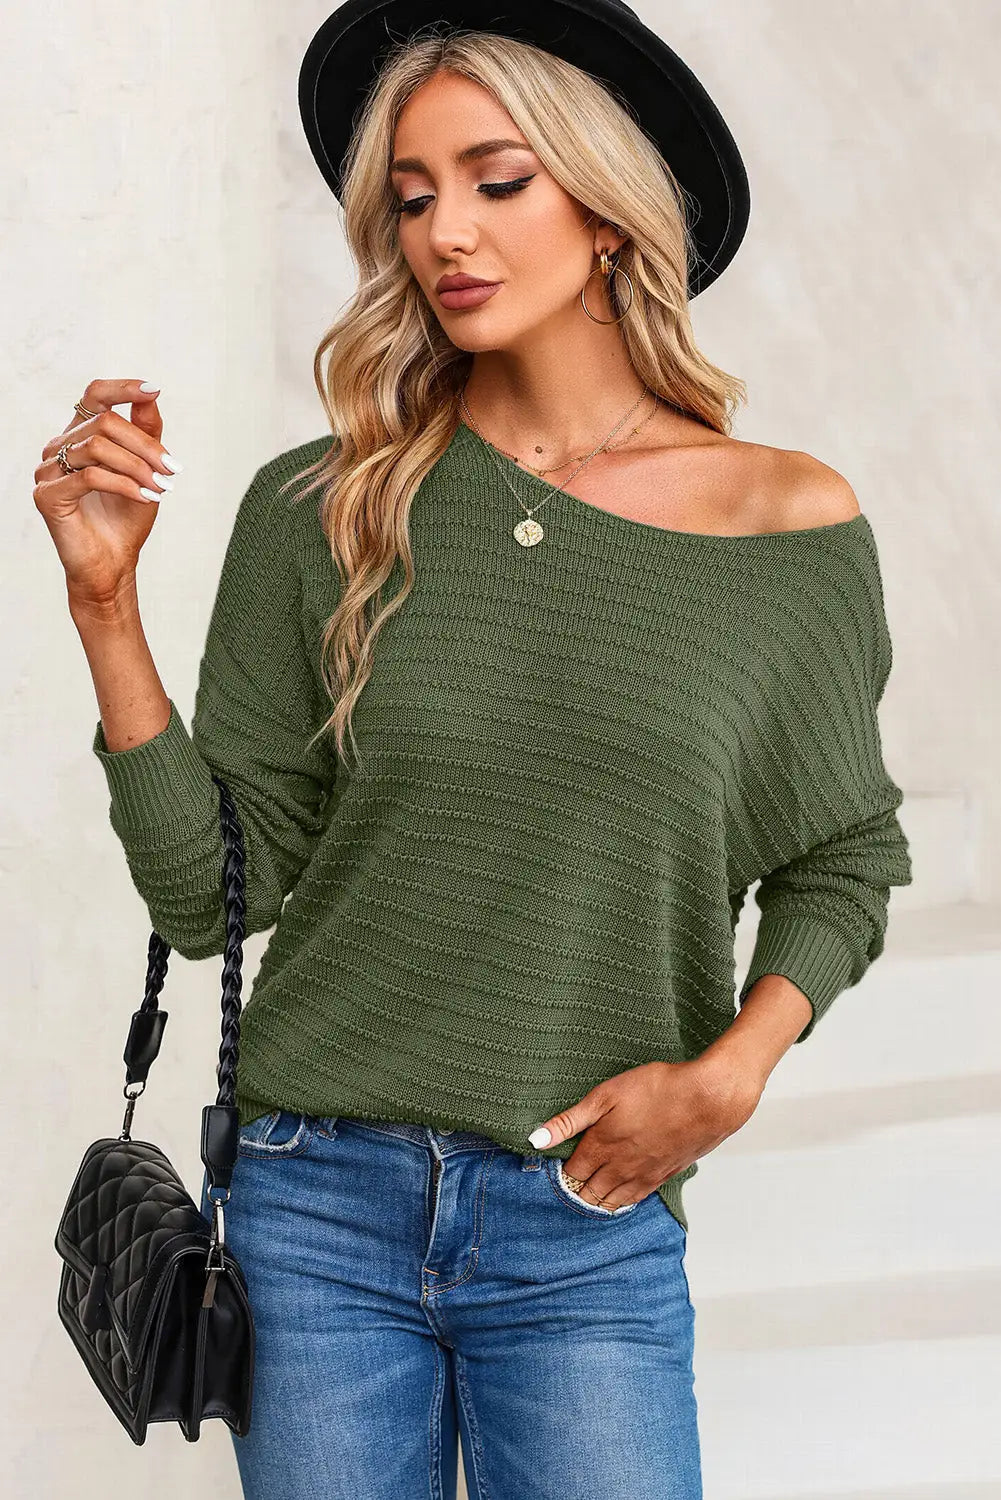 Green textured knit round neck dolman sleeve sweater - s / 55% acrylic + 45% cotton - sweaters & cardigans